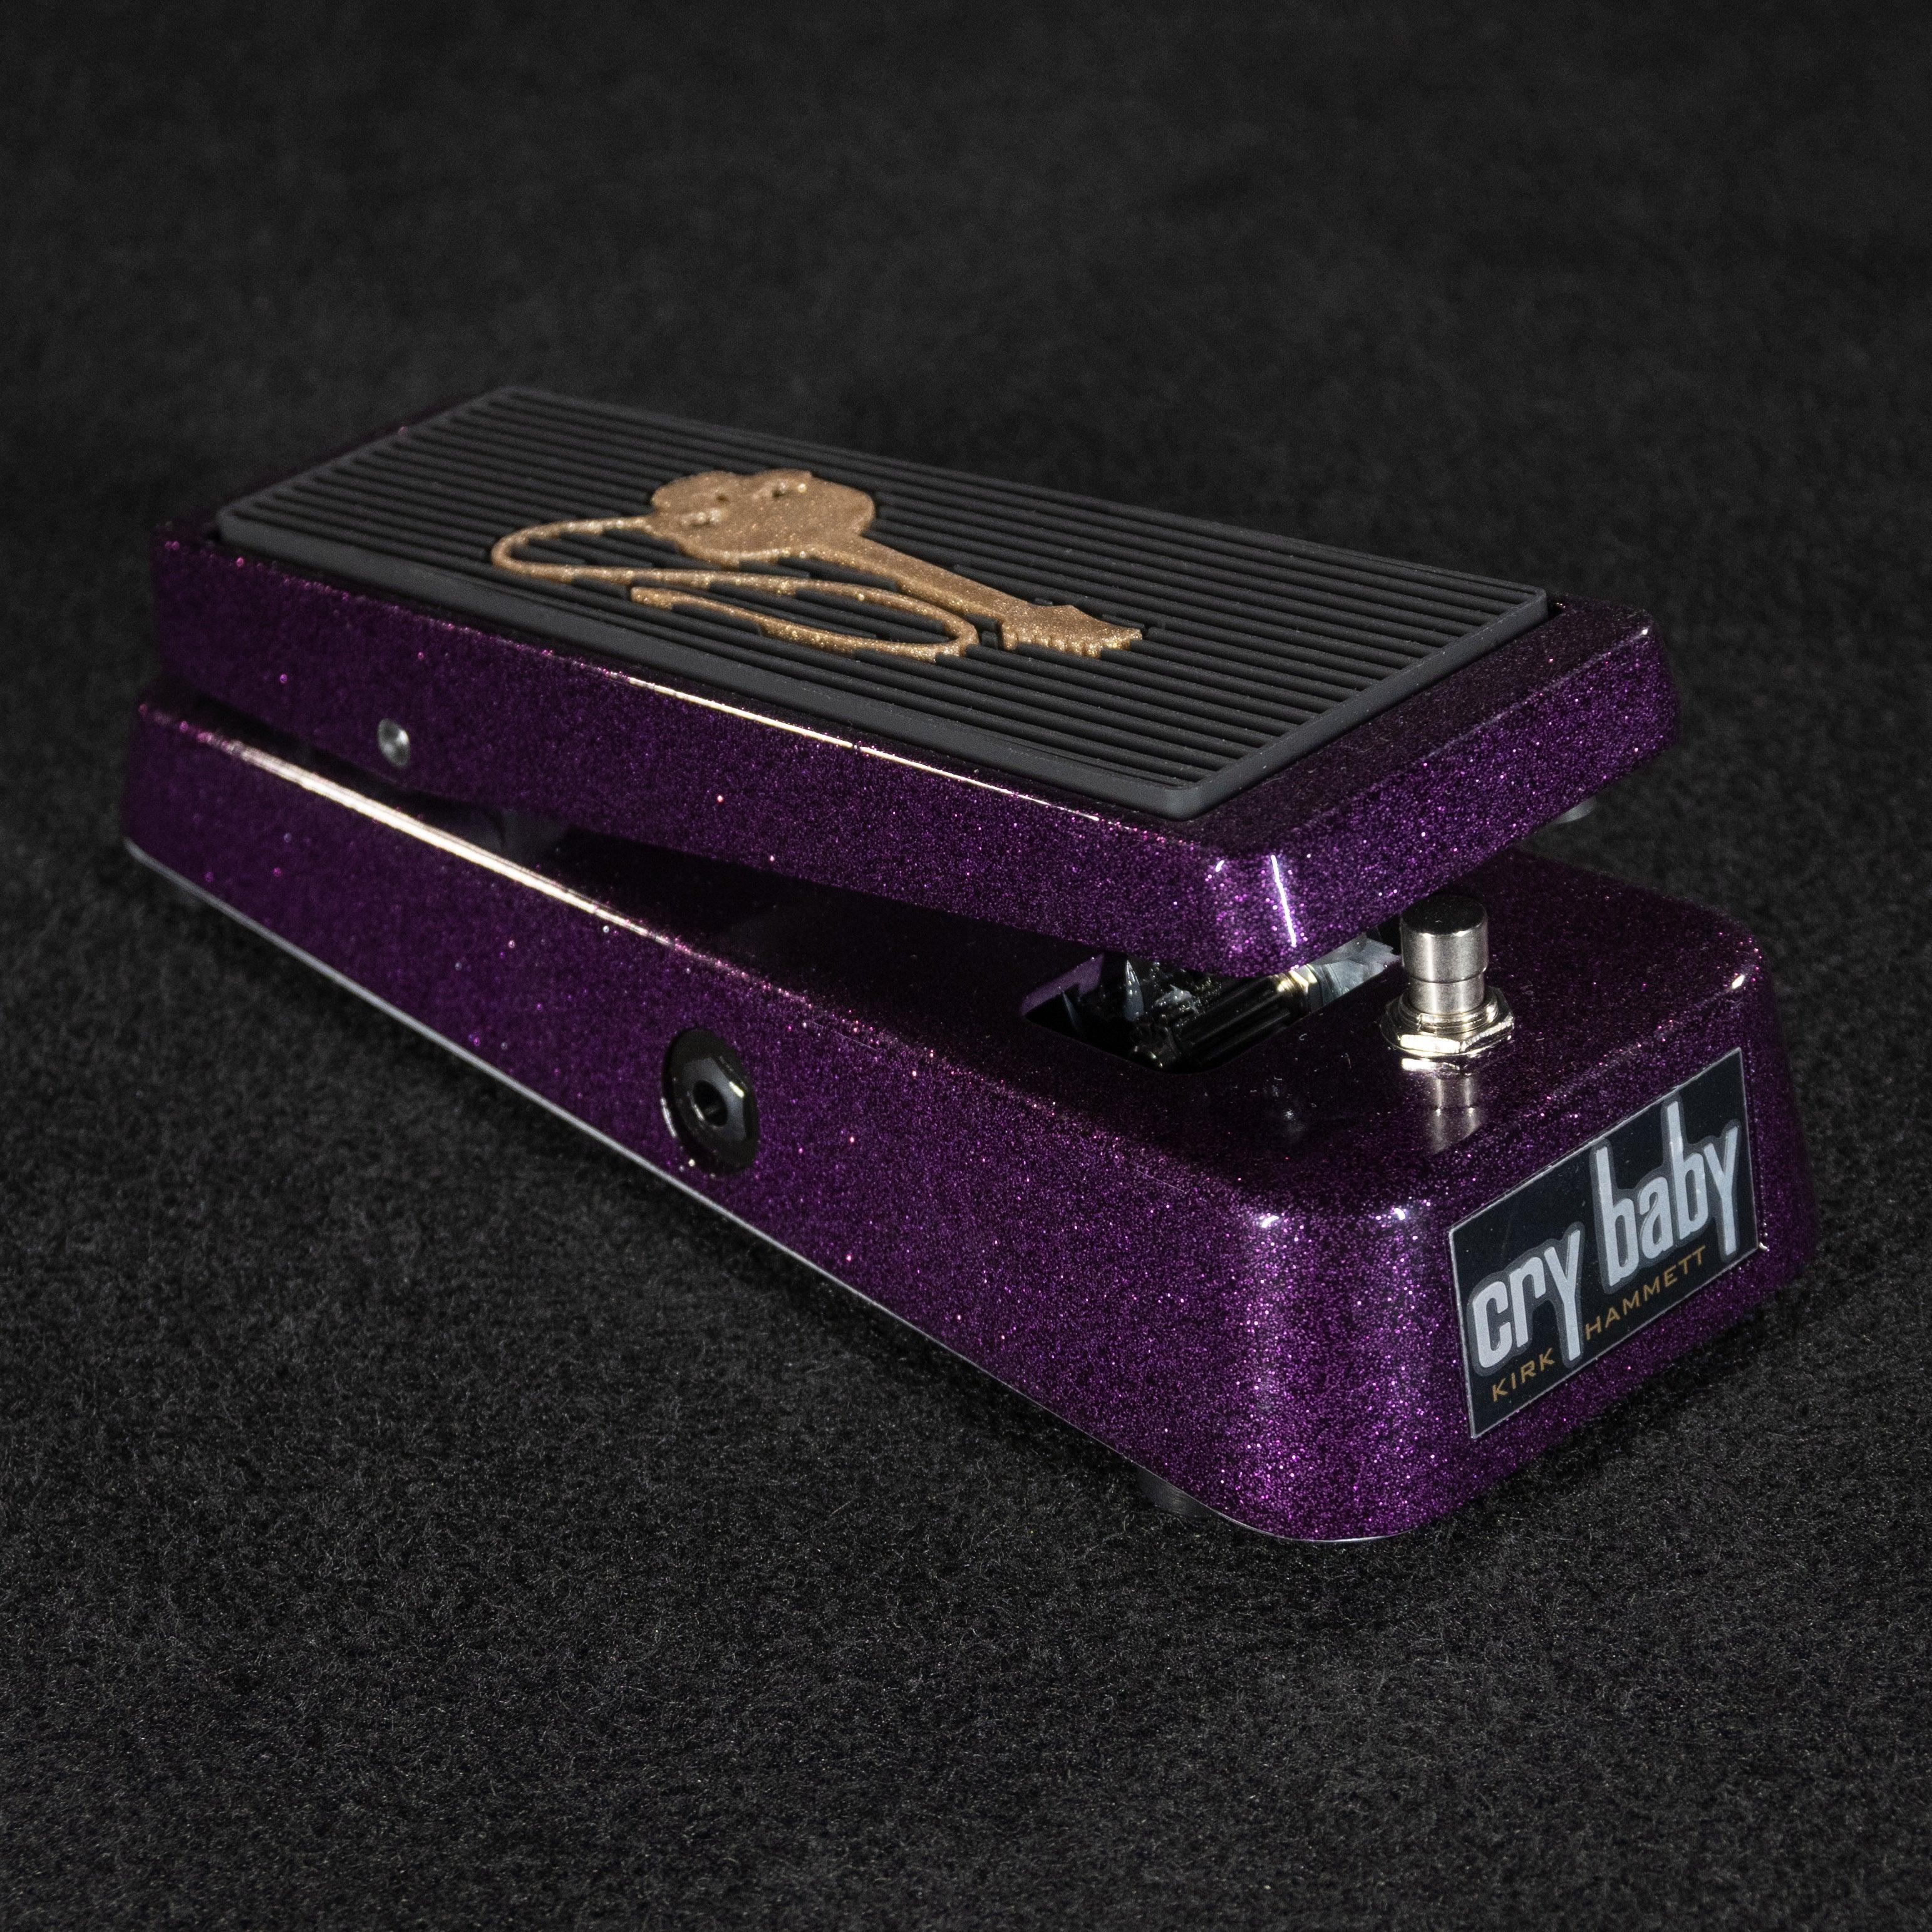 Dunlop KH95X Kirk Hammett Collection Cry Baby® Wah - Impulse Music Co.